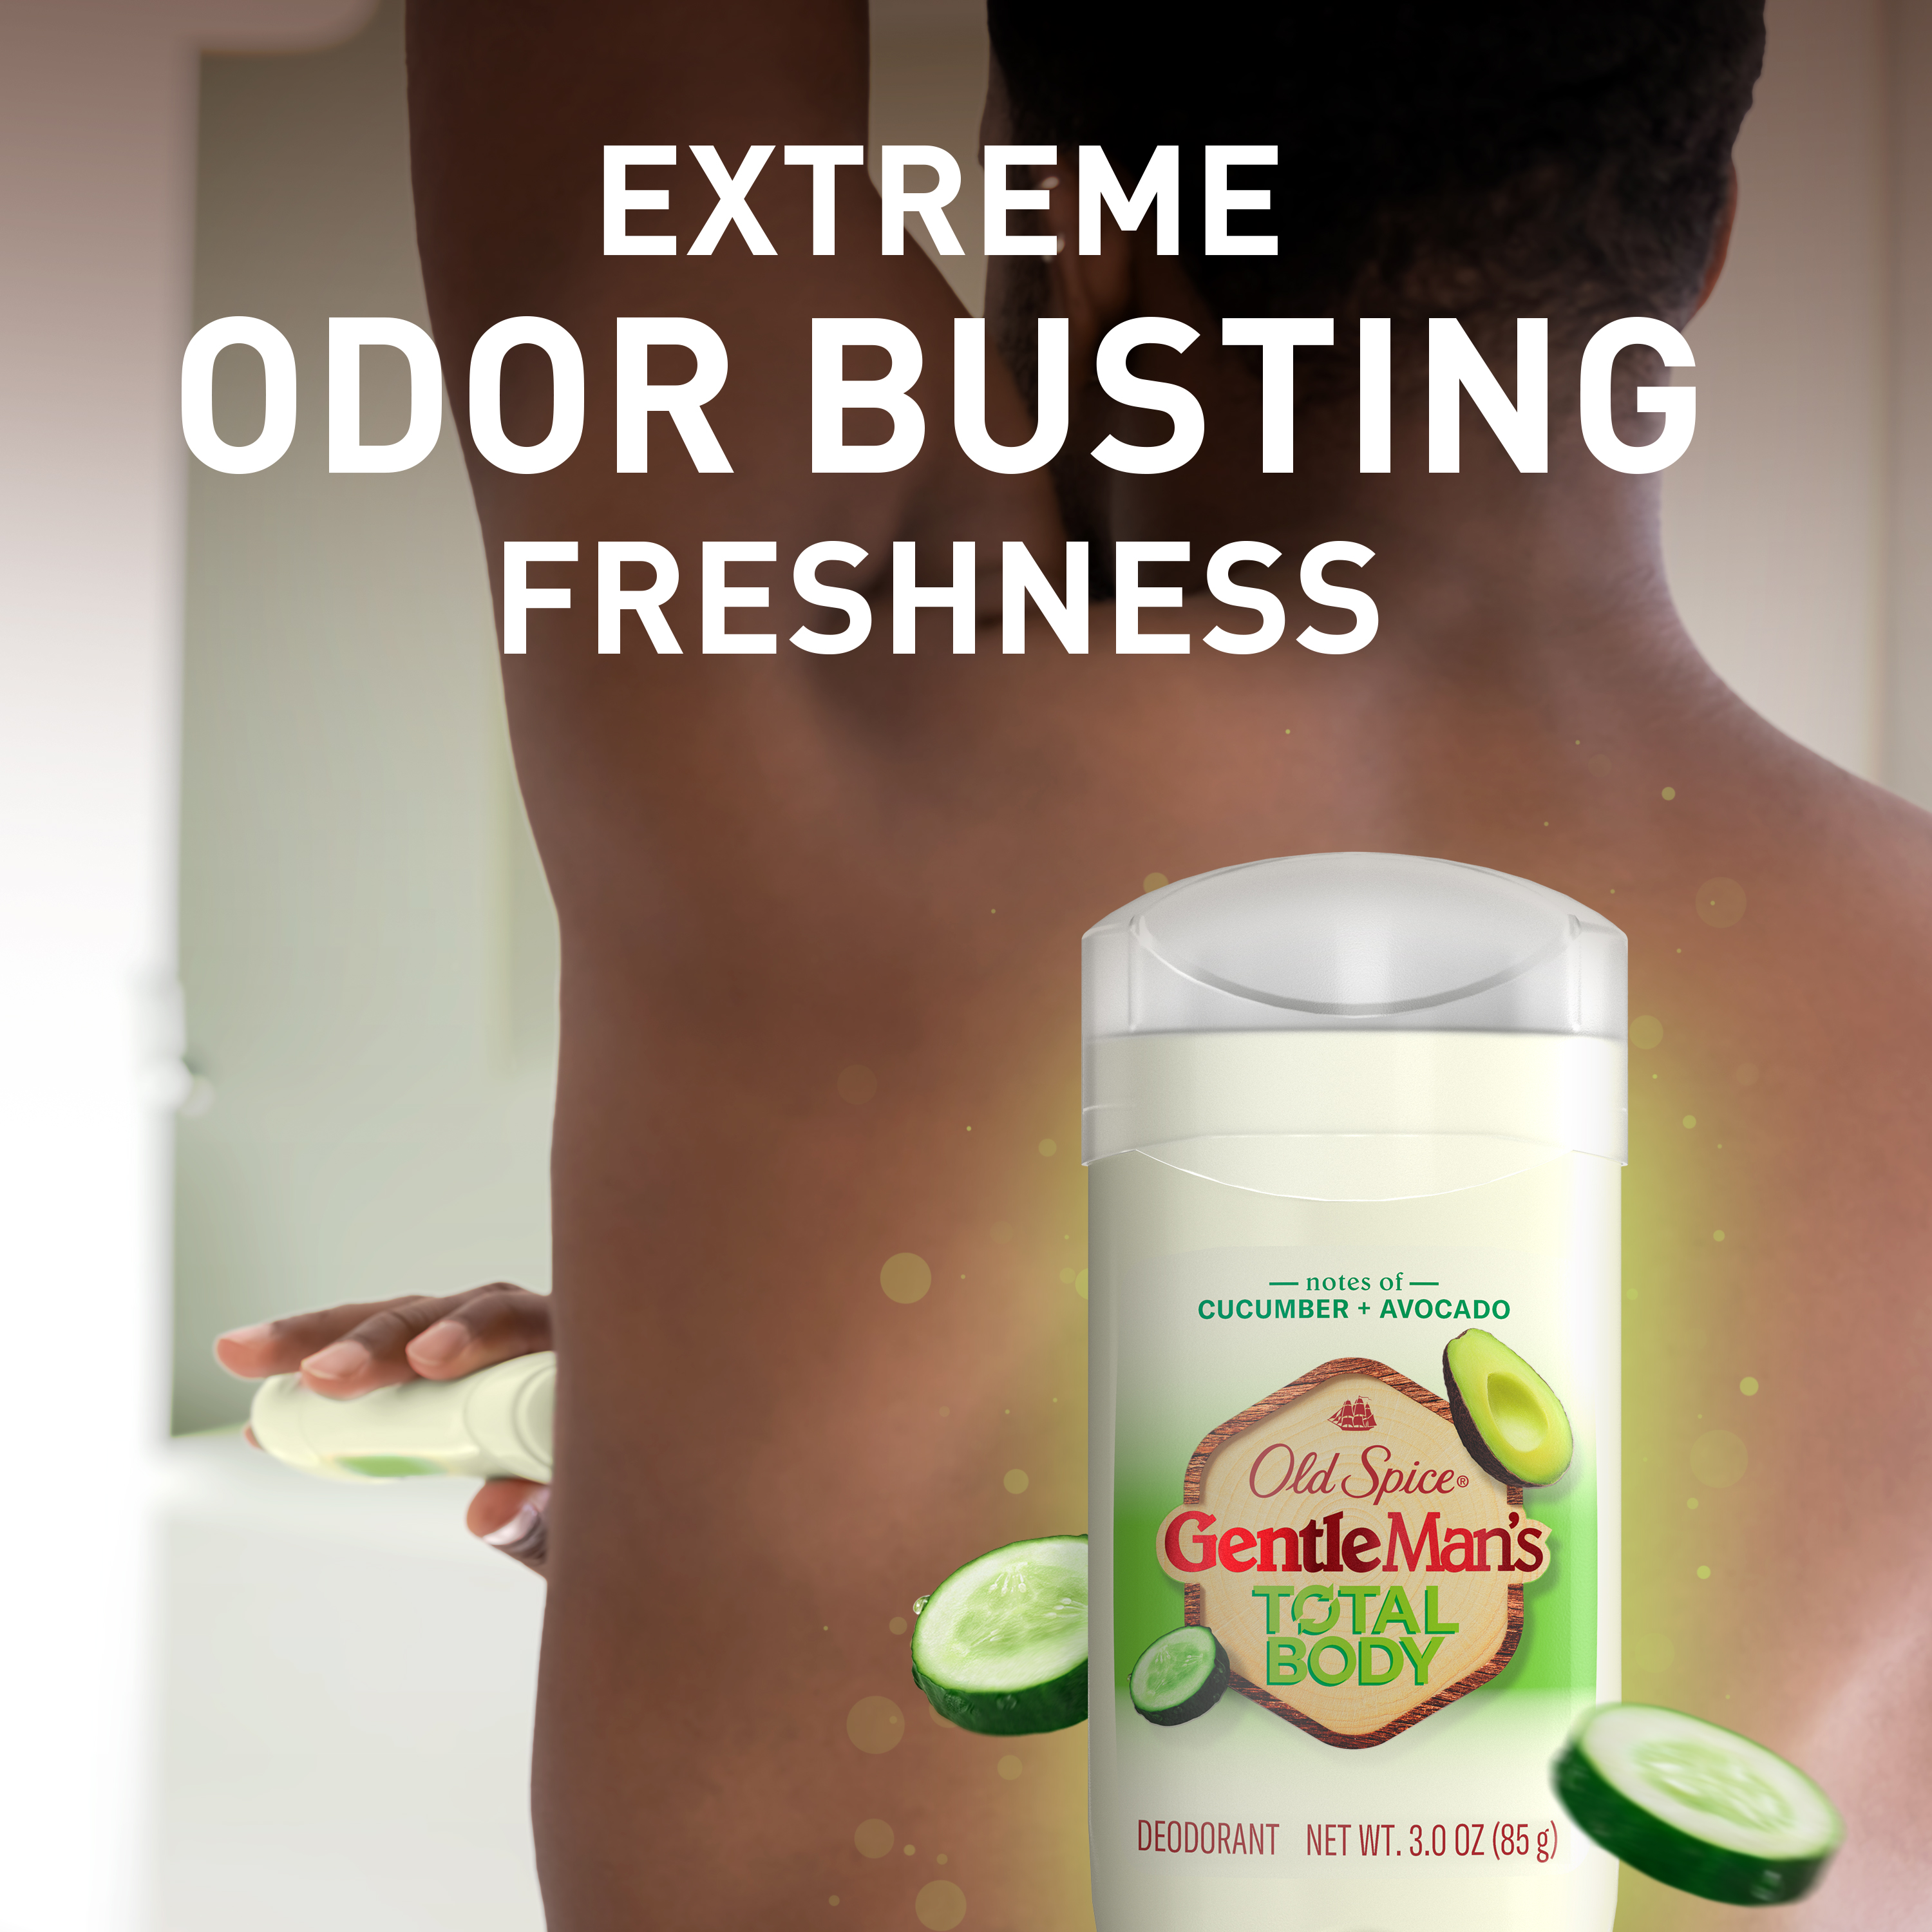 Old Spice GentleMan’s Blend Total Deodorant, Cucumber + Avocado, Aluminum Free Stick For 24/7 Freshness From Pits to Toes and Down Below, 3 oz